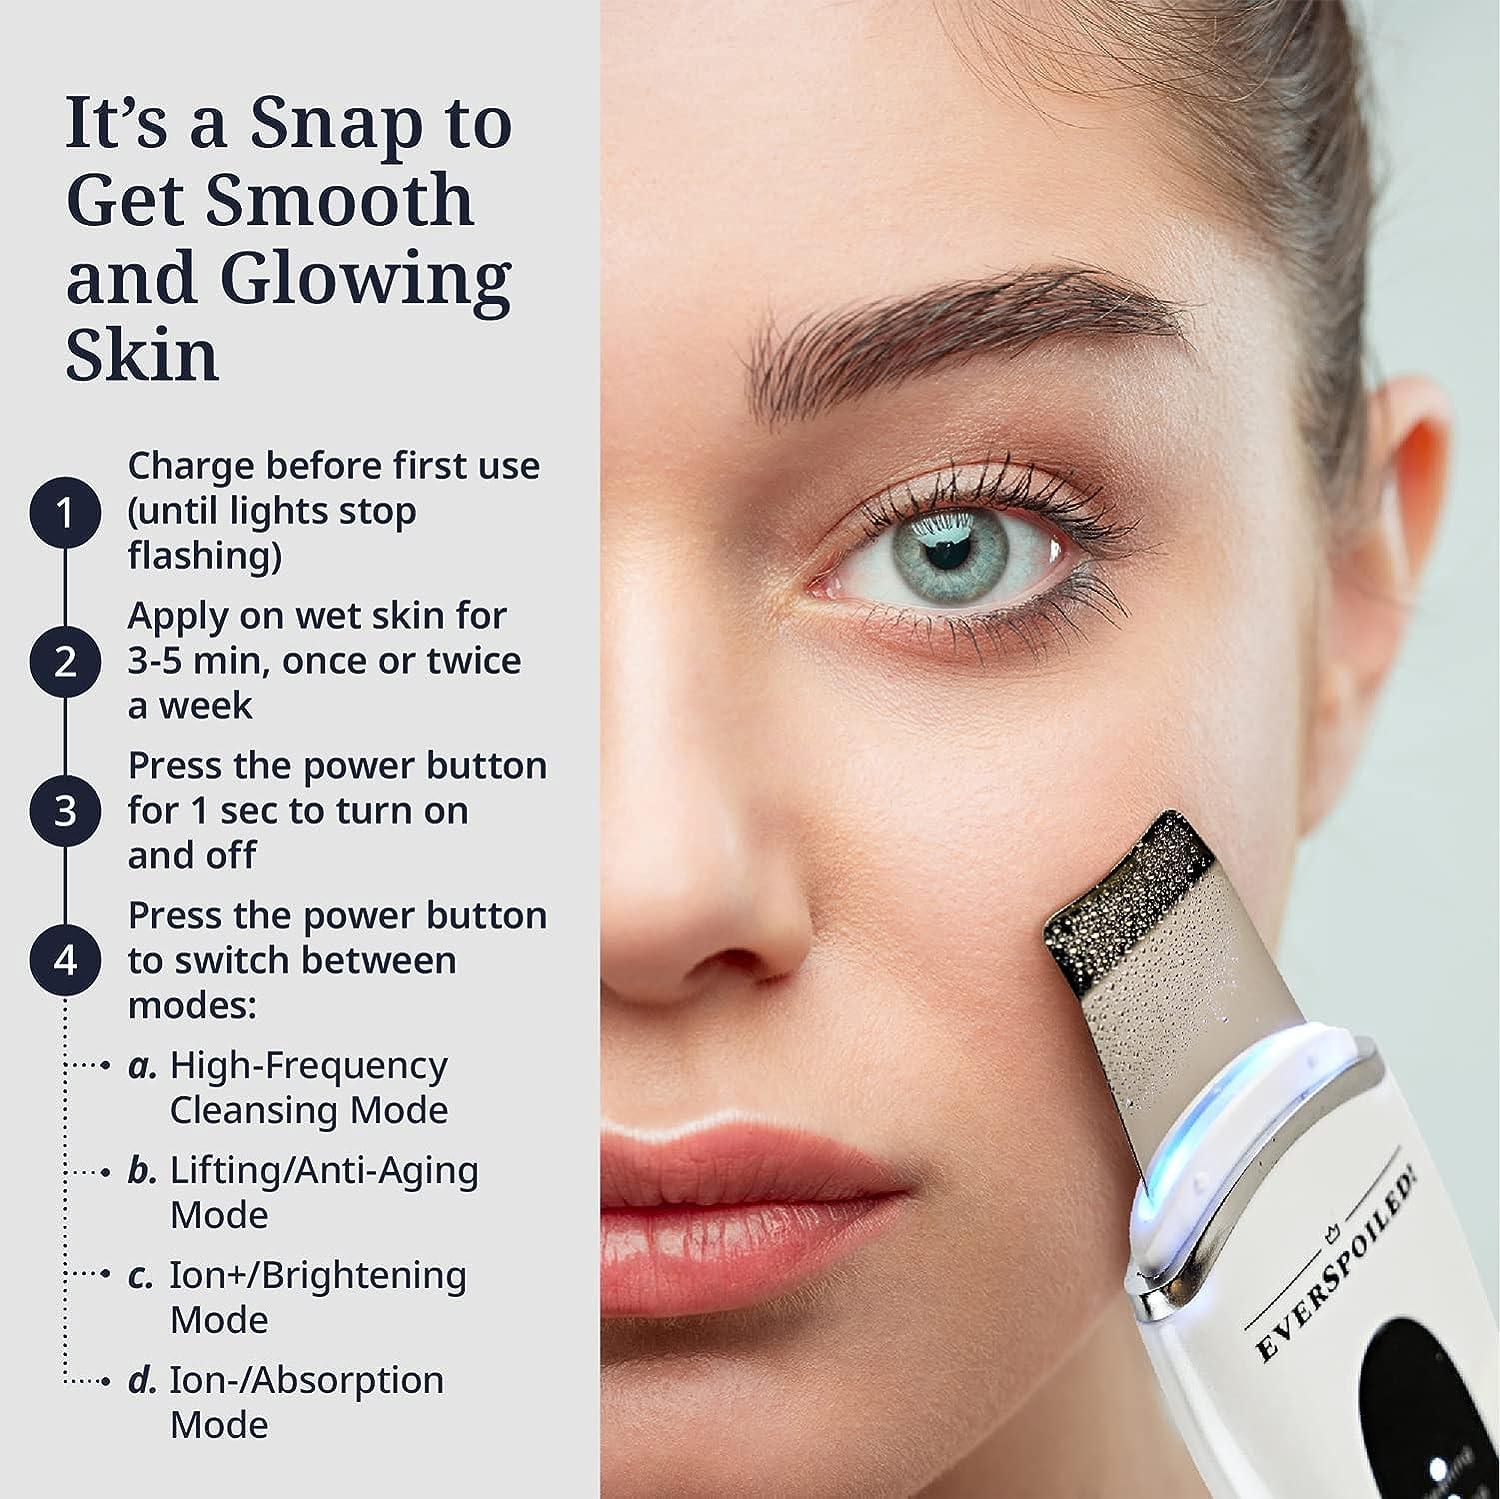 Skin Scrubber Face Spatula with Deep Pore Cleaning Lifting and Serum  Infuser Technologies - Ultrasonic Skin Scrubber - Gentle Dead Skin Remover  for Face - Blackhead Scraper Tool